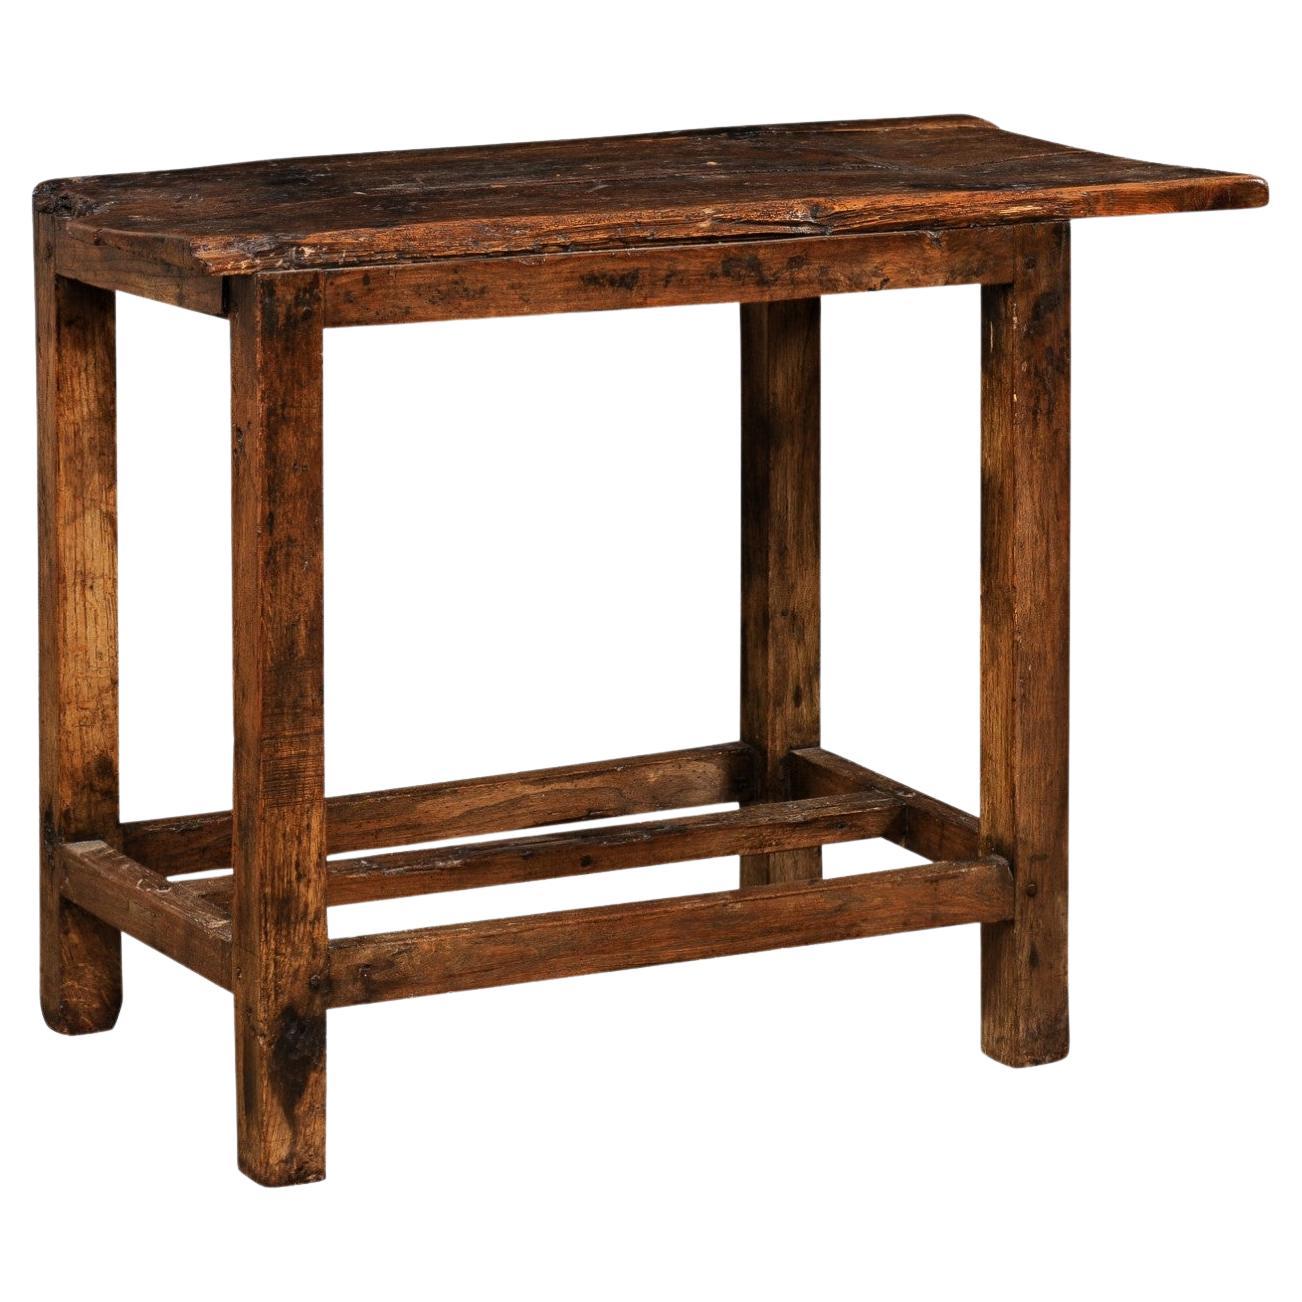 Spanish Late 18th C. Rustic Wooden Accent Table w/Unique Off-Set Live-Edge Top   For Sale